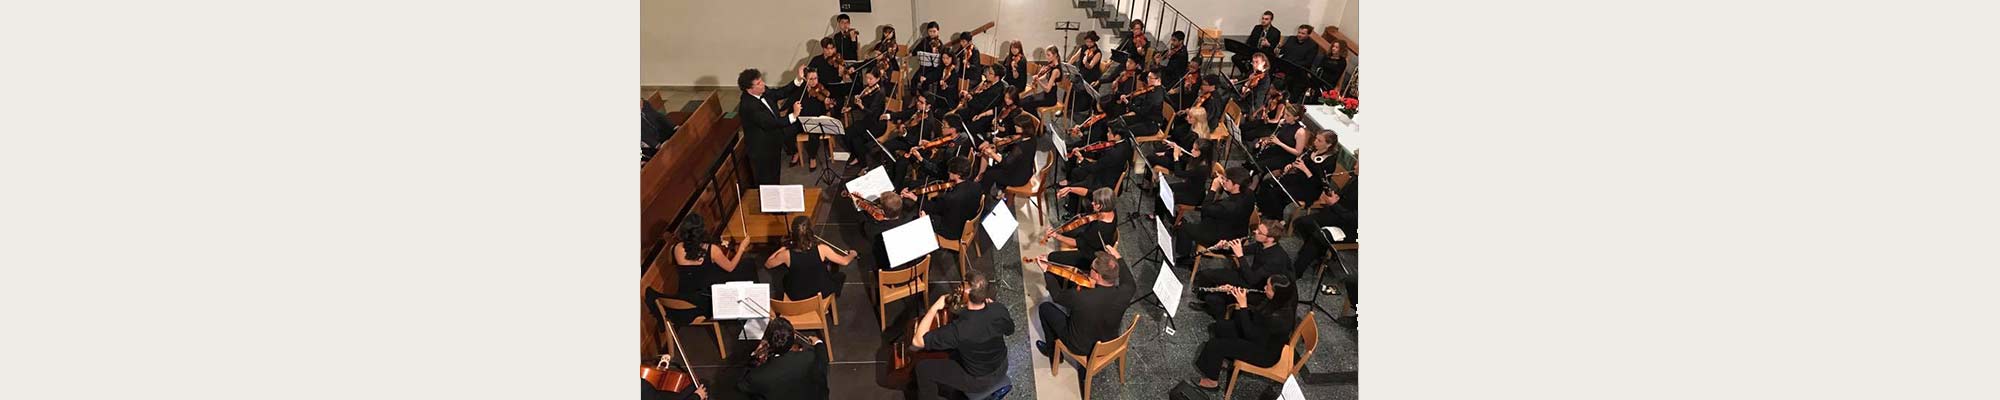 orchestra at summer music festival